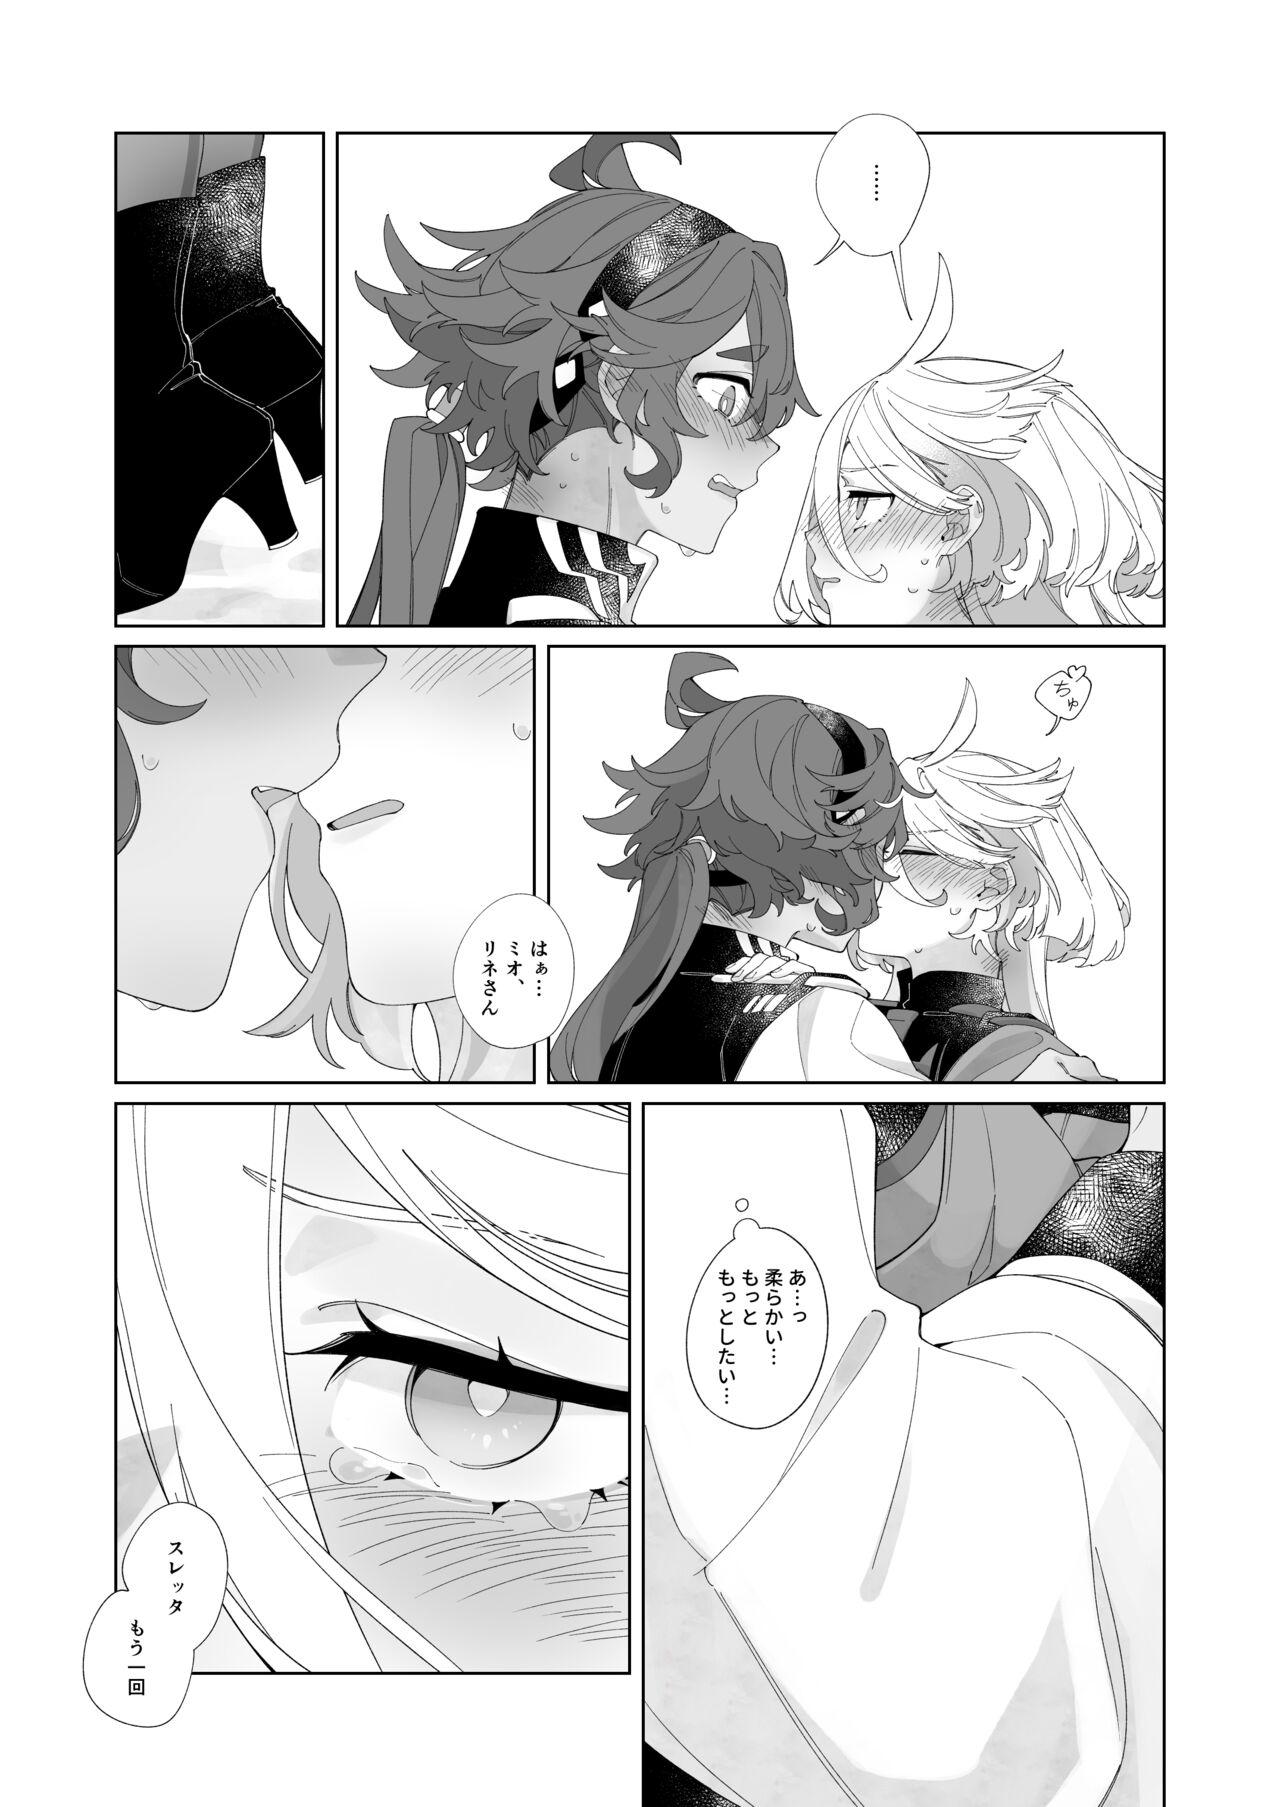 Banho Kiss no Ato Nani ga Shitai? - After kissing, what else do you want to do? - Mobile suit gundam the witch from mercury Thong - Page 7